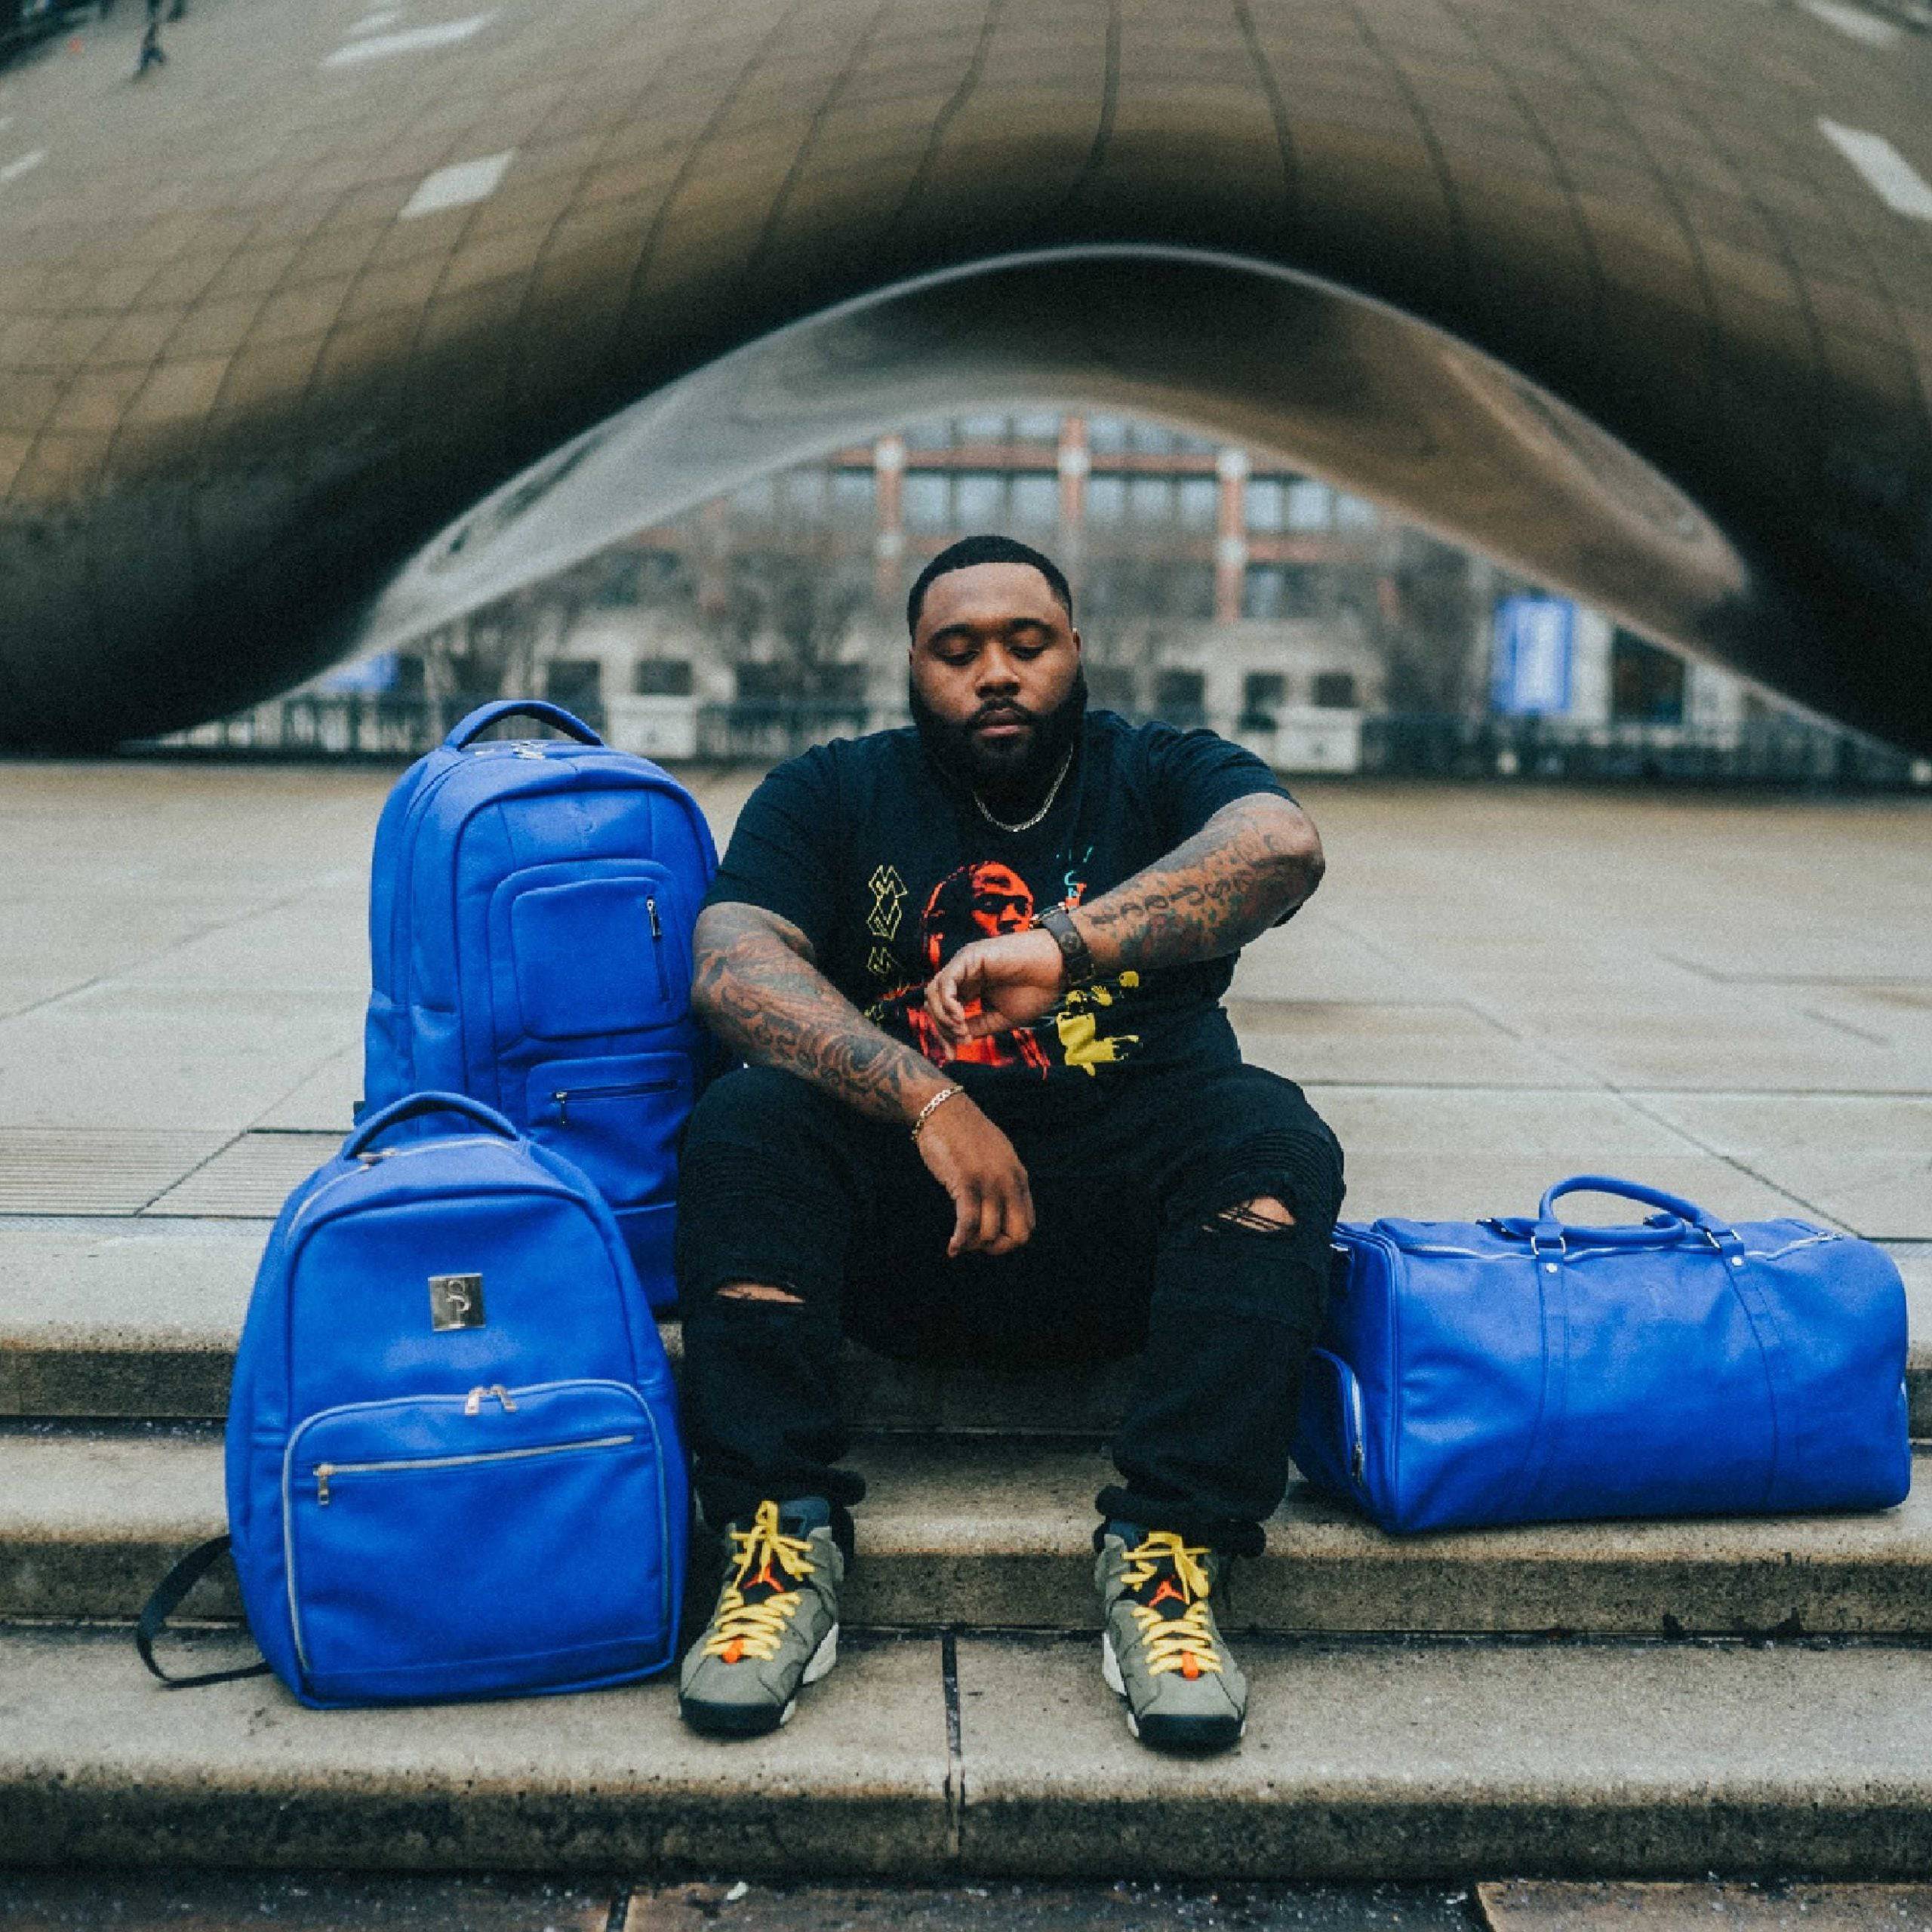 Royal Blue Leather Duffle Bag (Unbreakable Collab) 150 Made